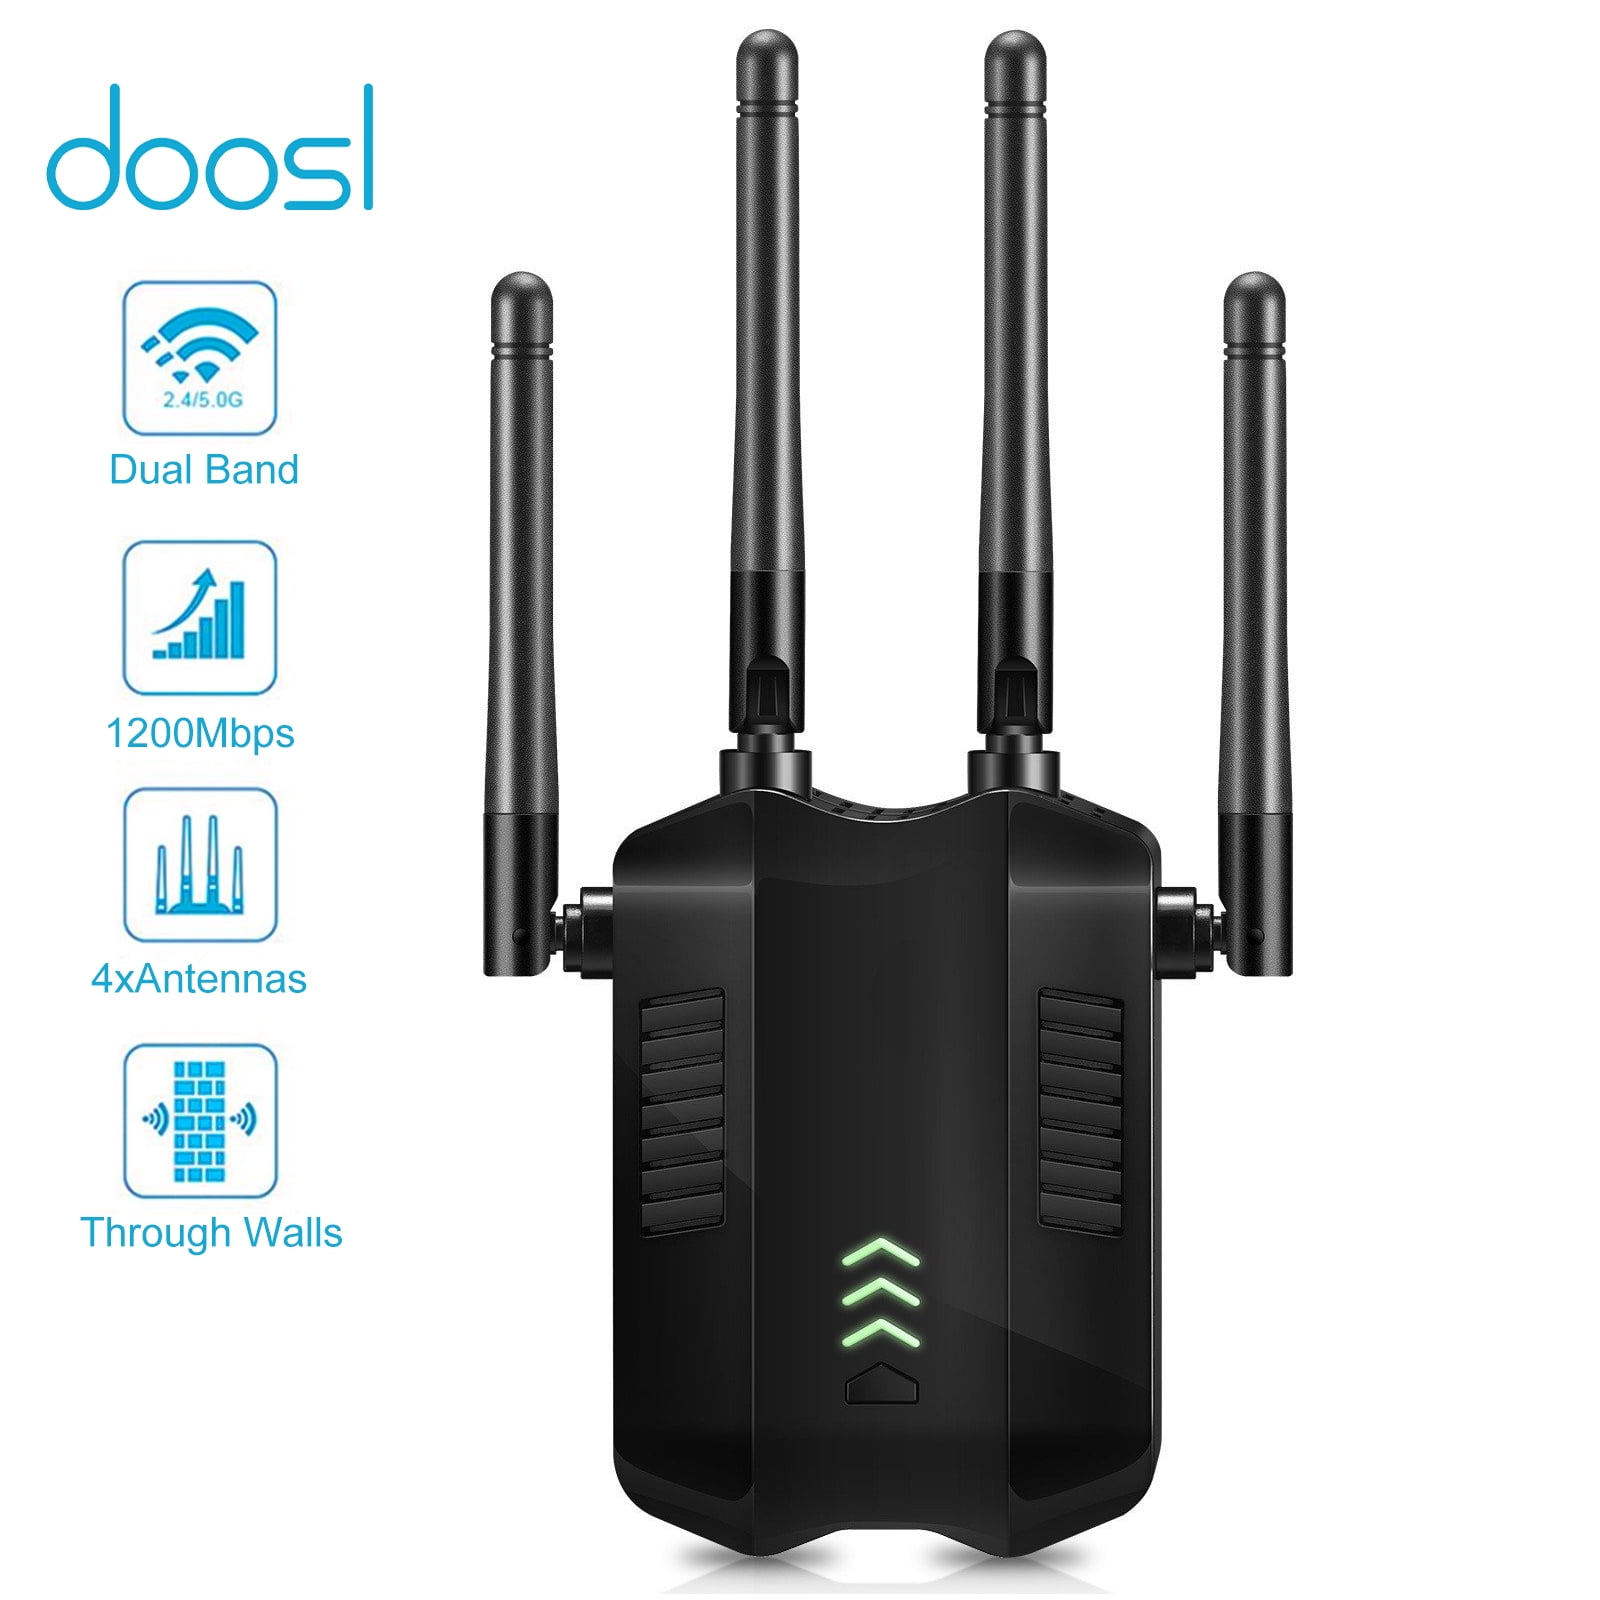 Merchandising narrow acute WiFi Range Extender, 1200Mbps Signal Booster Repeater Cover up to 8000  sq.ft, 2.4 & 5GHz Dual Band WiFi Extender, 4 Antennas 360° Full Coverage  Wireless Internet Amplifier for Smart Home Devices - Walmart.com